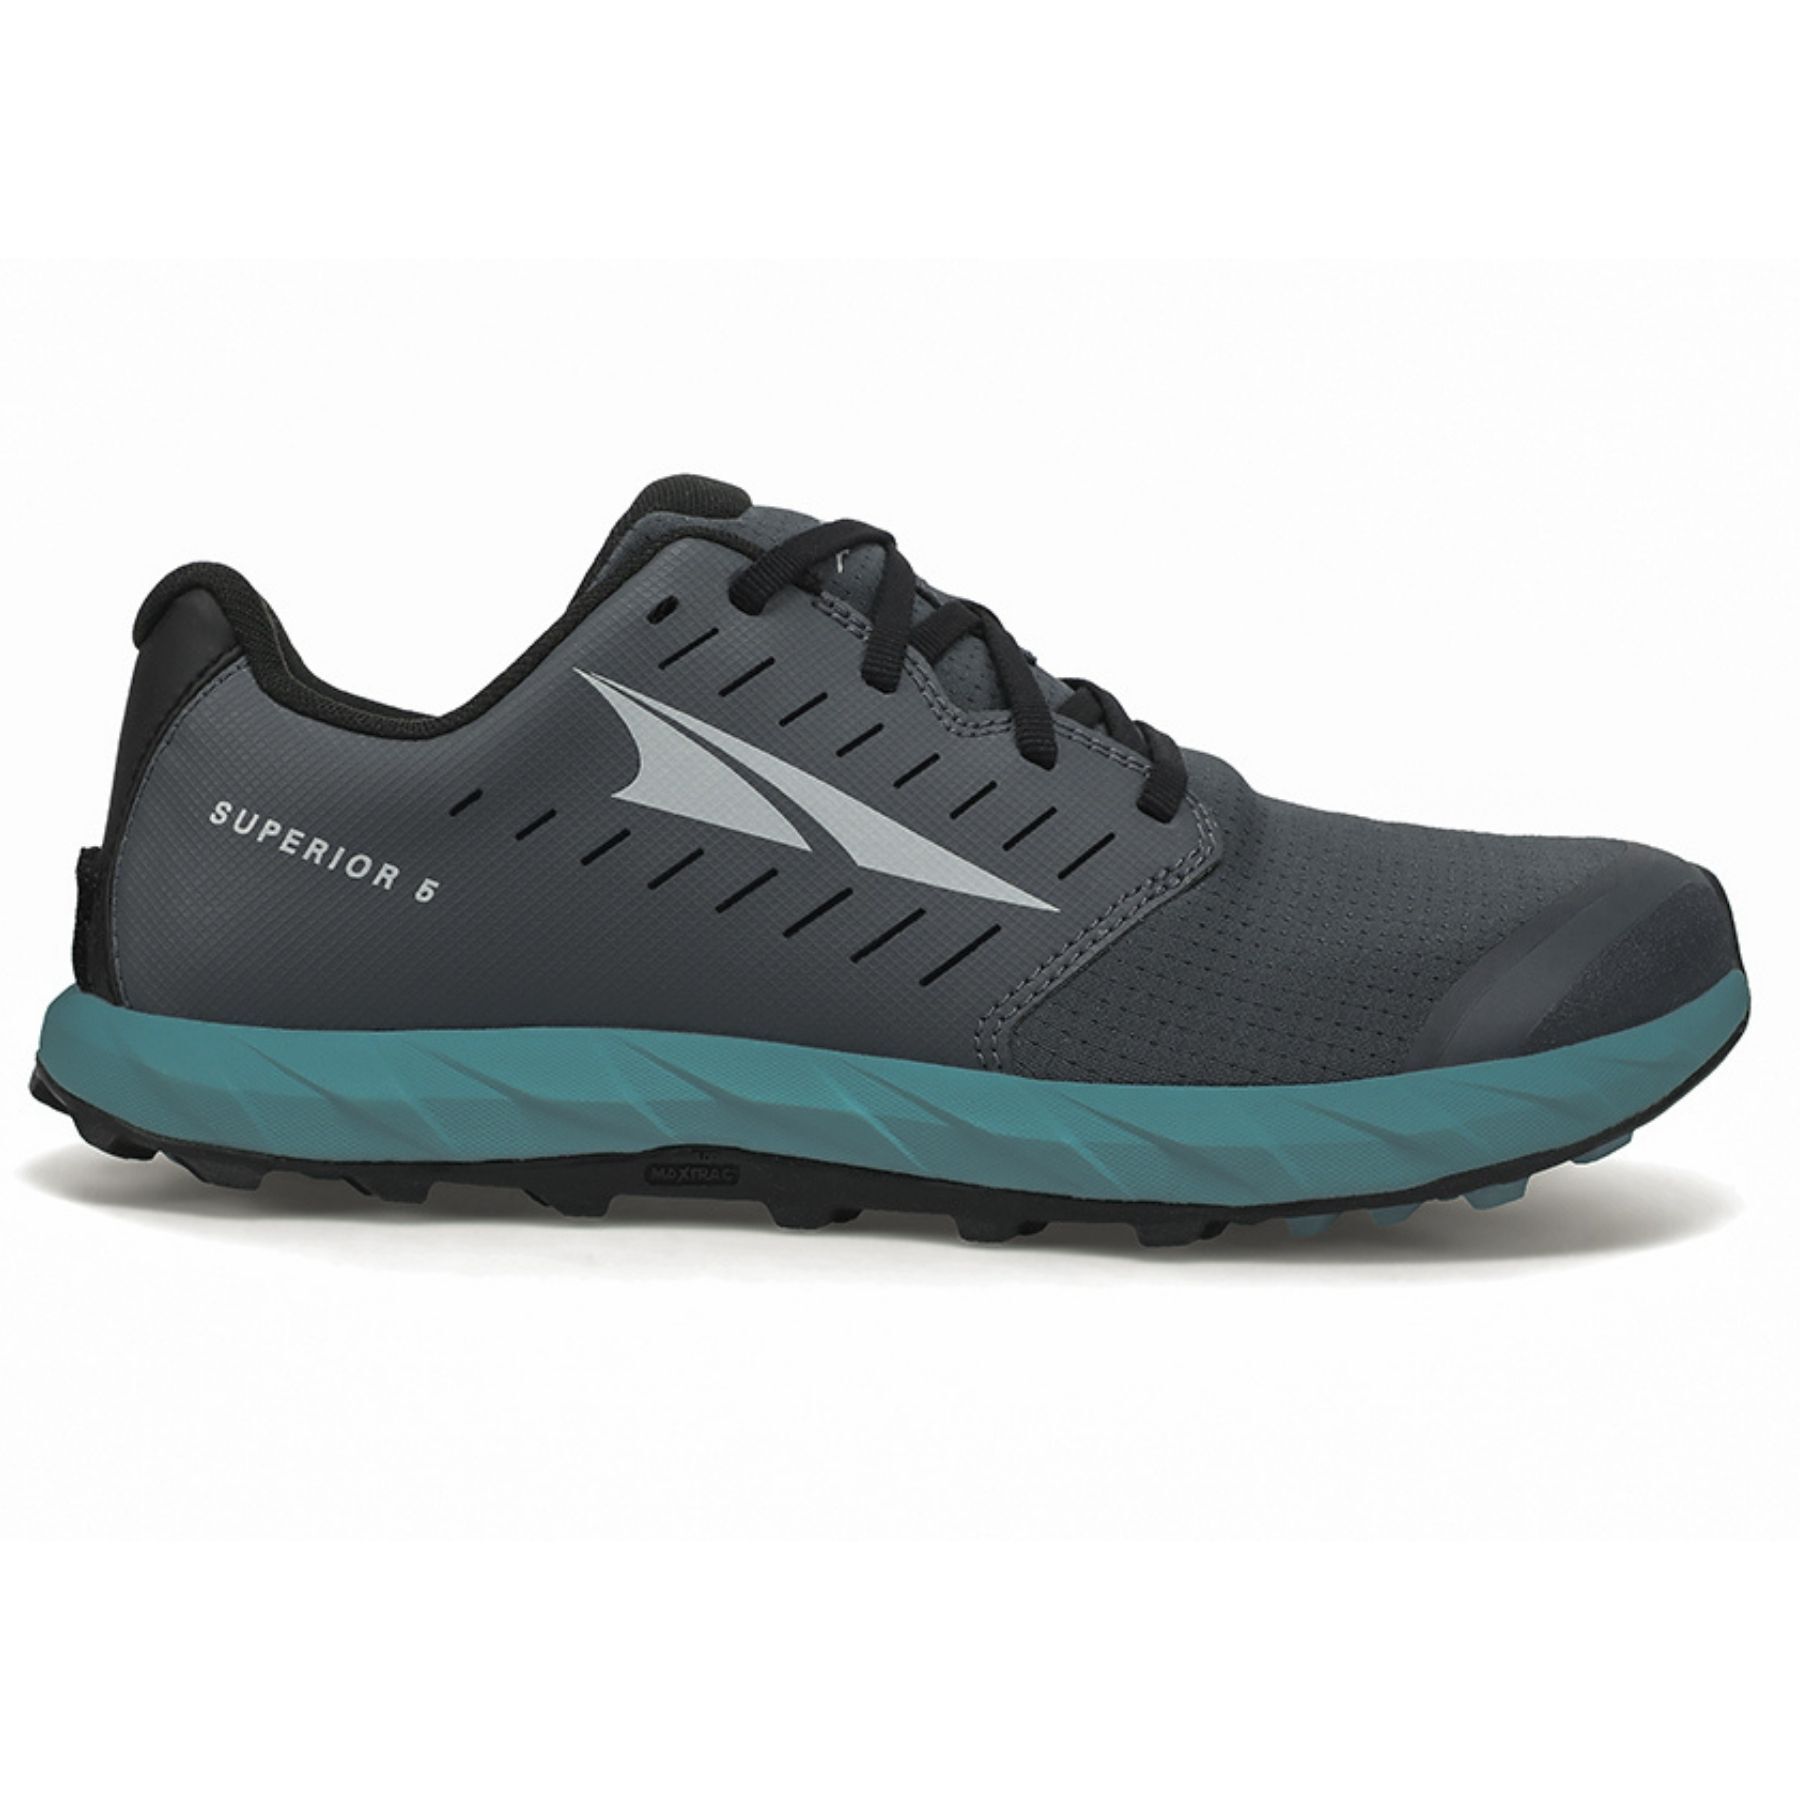 Altra Superior 5 - Chaussures trail femme | Hardloop